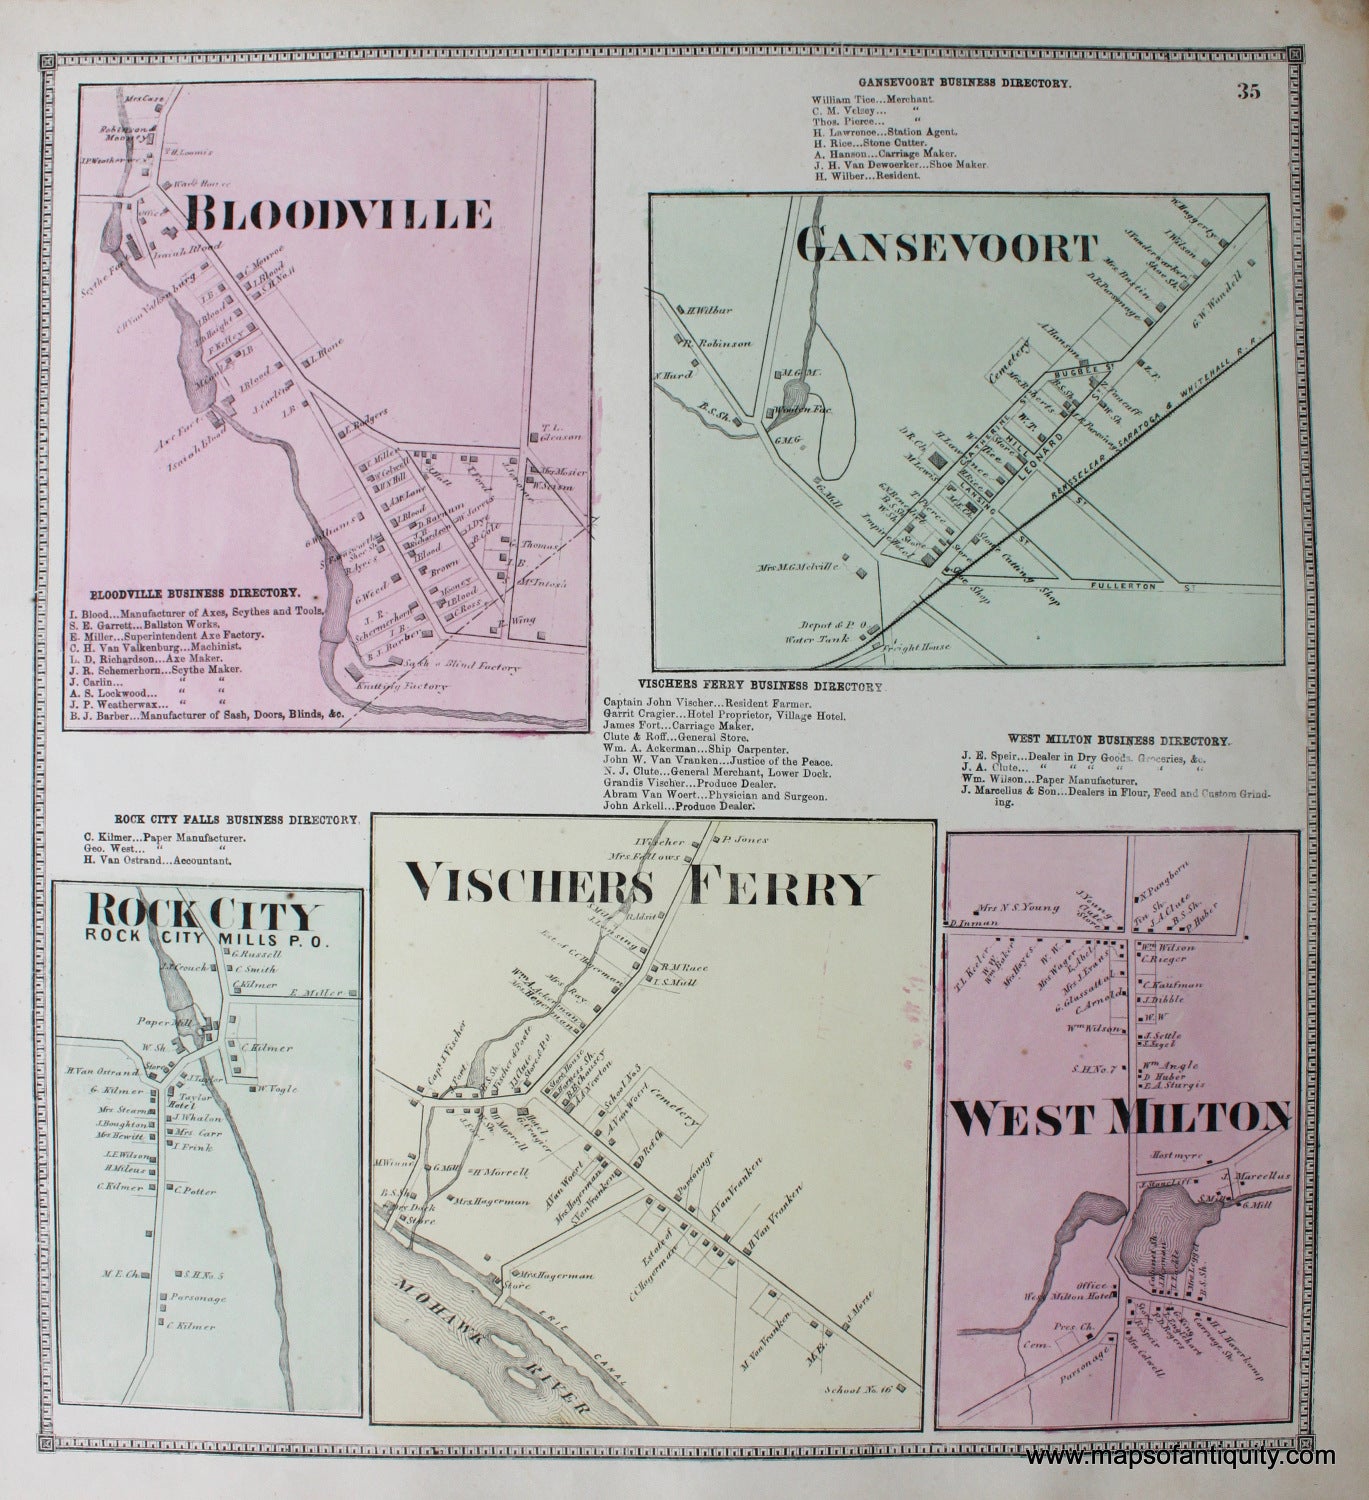 Hand-Colored-Engraved-Antique-Map-Bloodville-Gansevoort-Rock-City-Vischers-Ferry-West-Milton-New-York-United-States-Northeast-1866-Stone-and-Stewart-Maps-Of-Antiquity